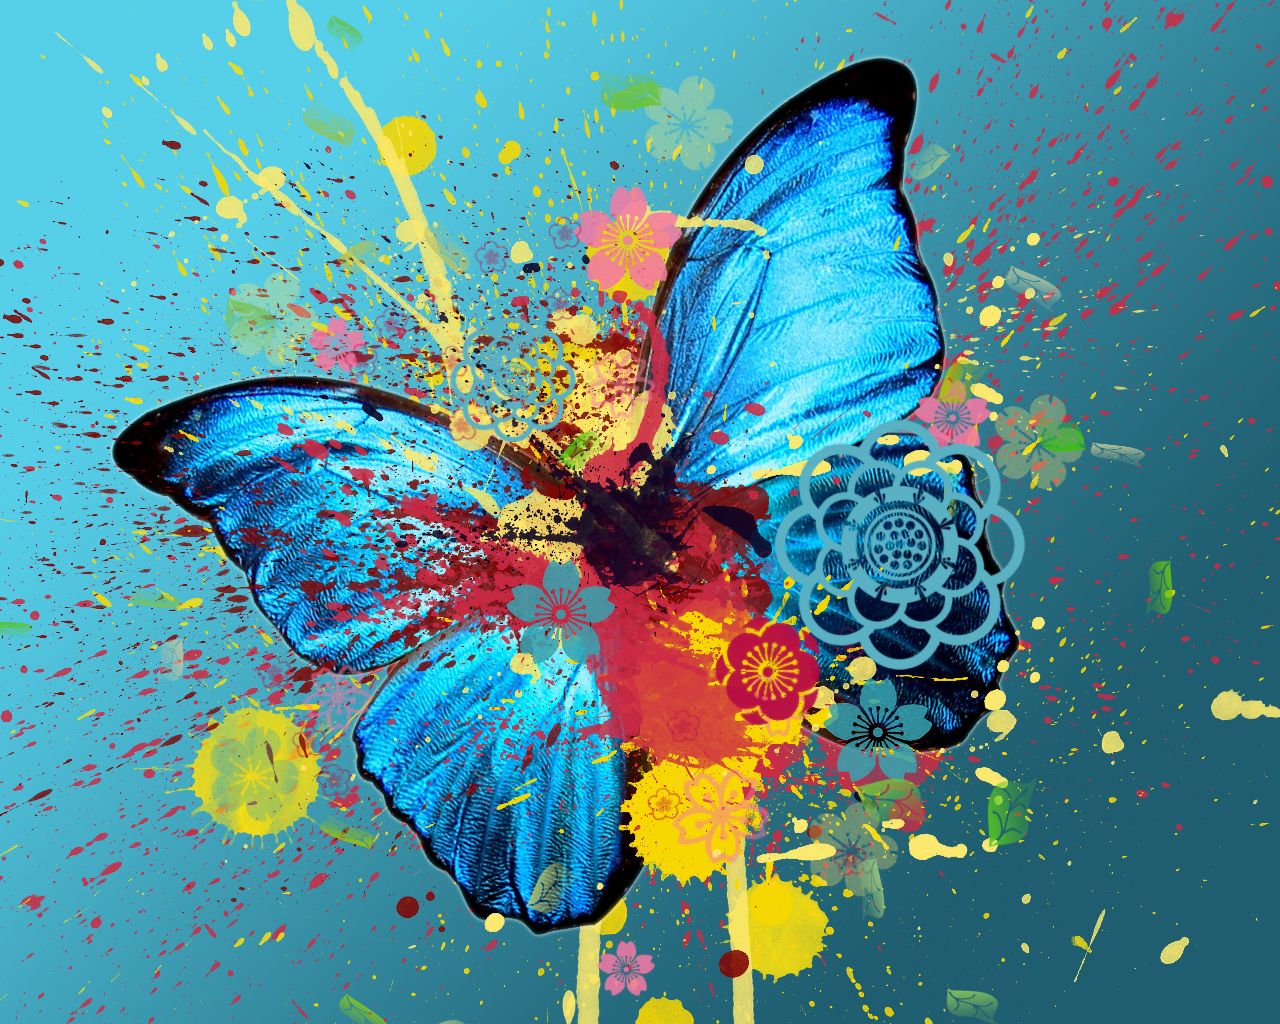 Download wallpaper: blue butterfly and, download wallpaper for desktop, butterfly wallpaper